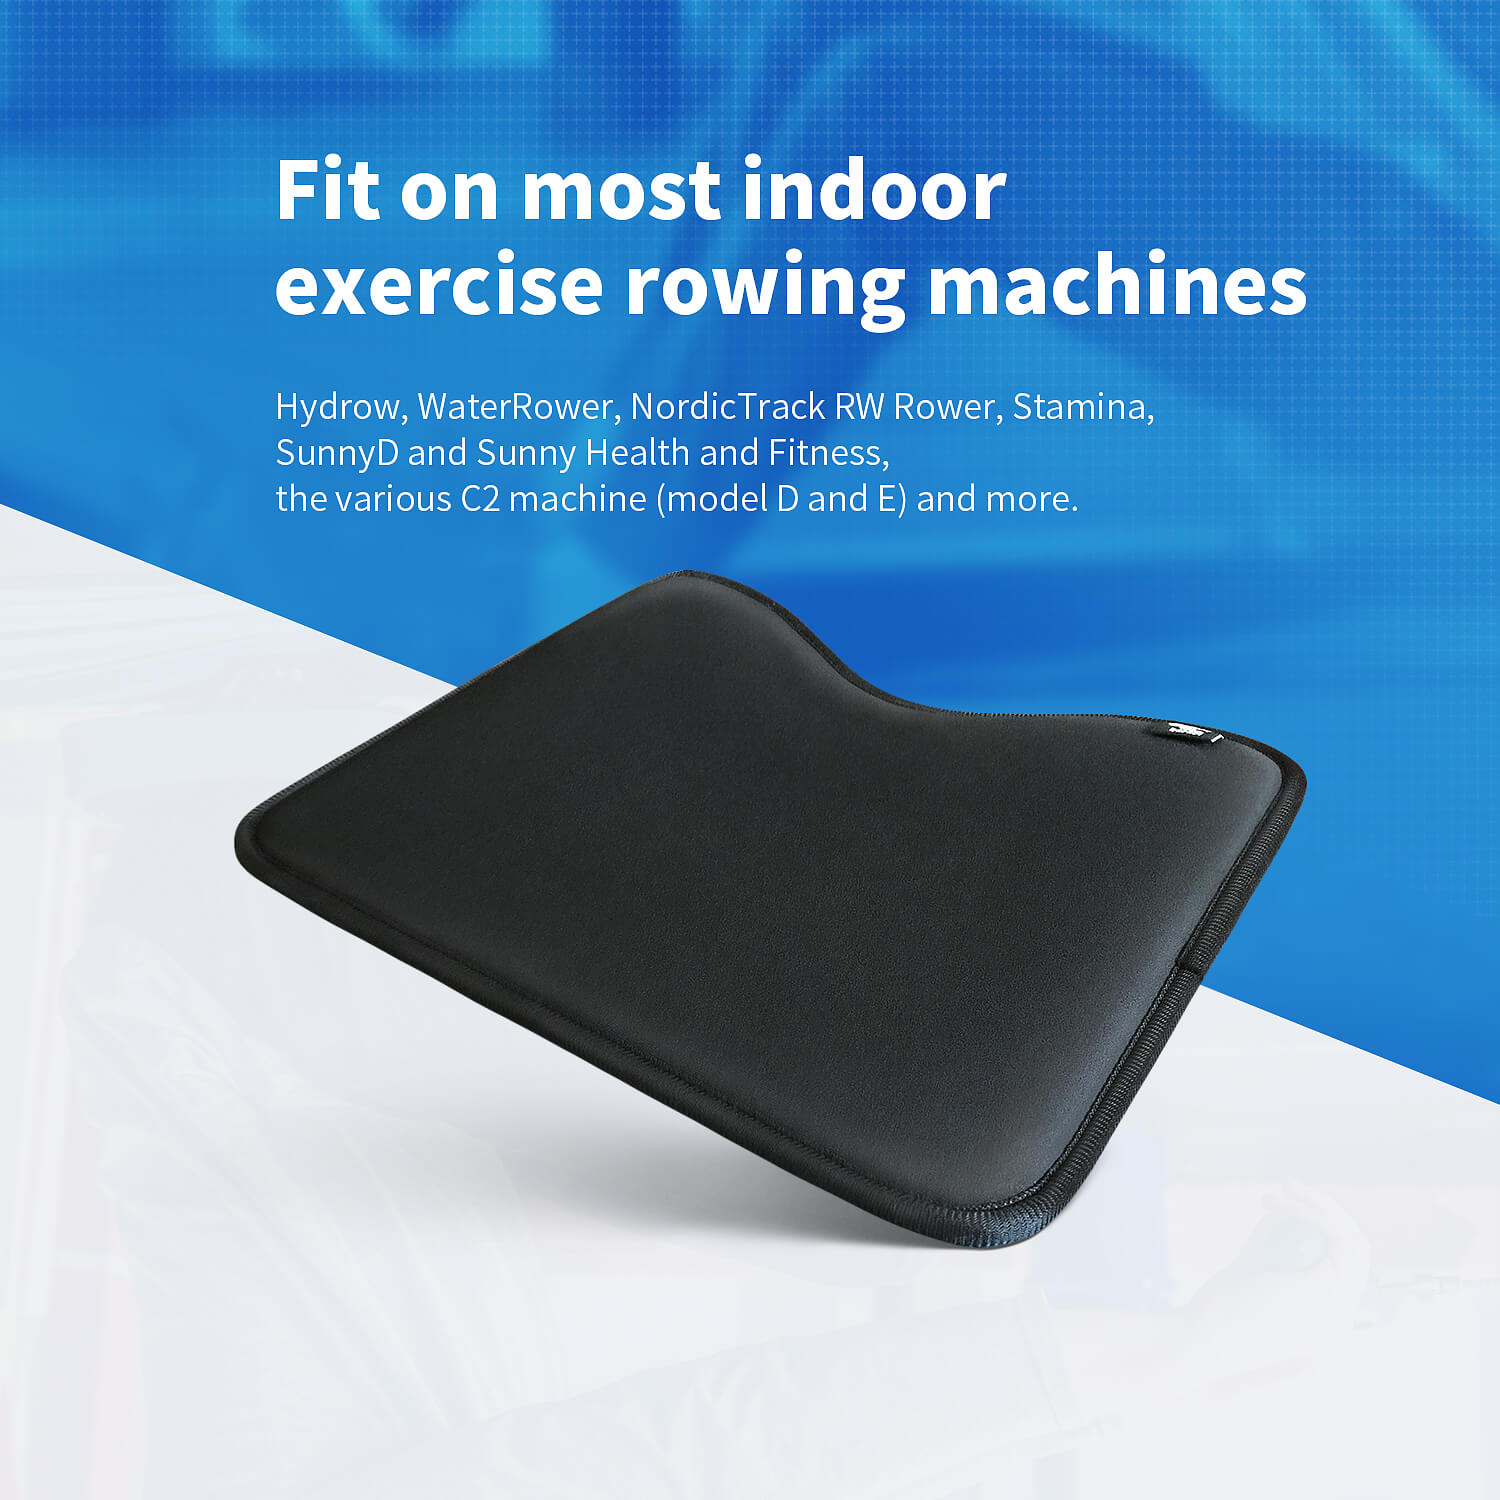 Rowing Machine Seat Cushion fits perfectly on Concept 2 Rowing Machine by Hornet Watersports